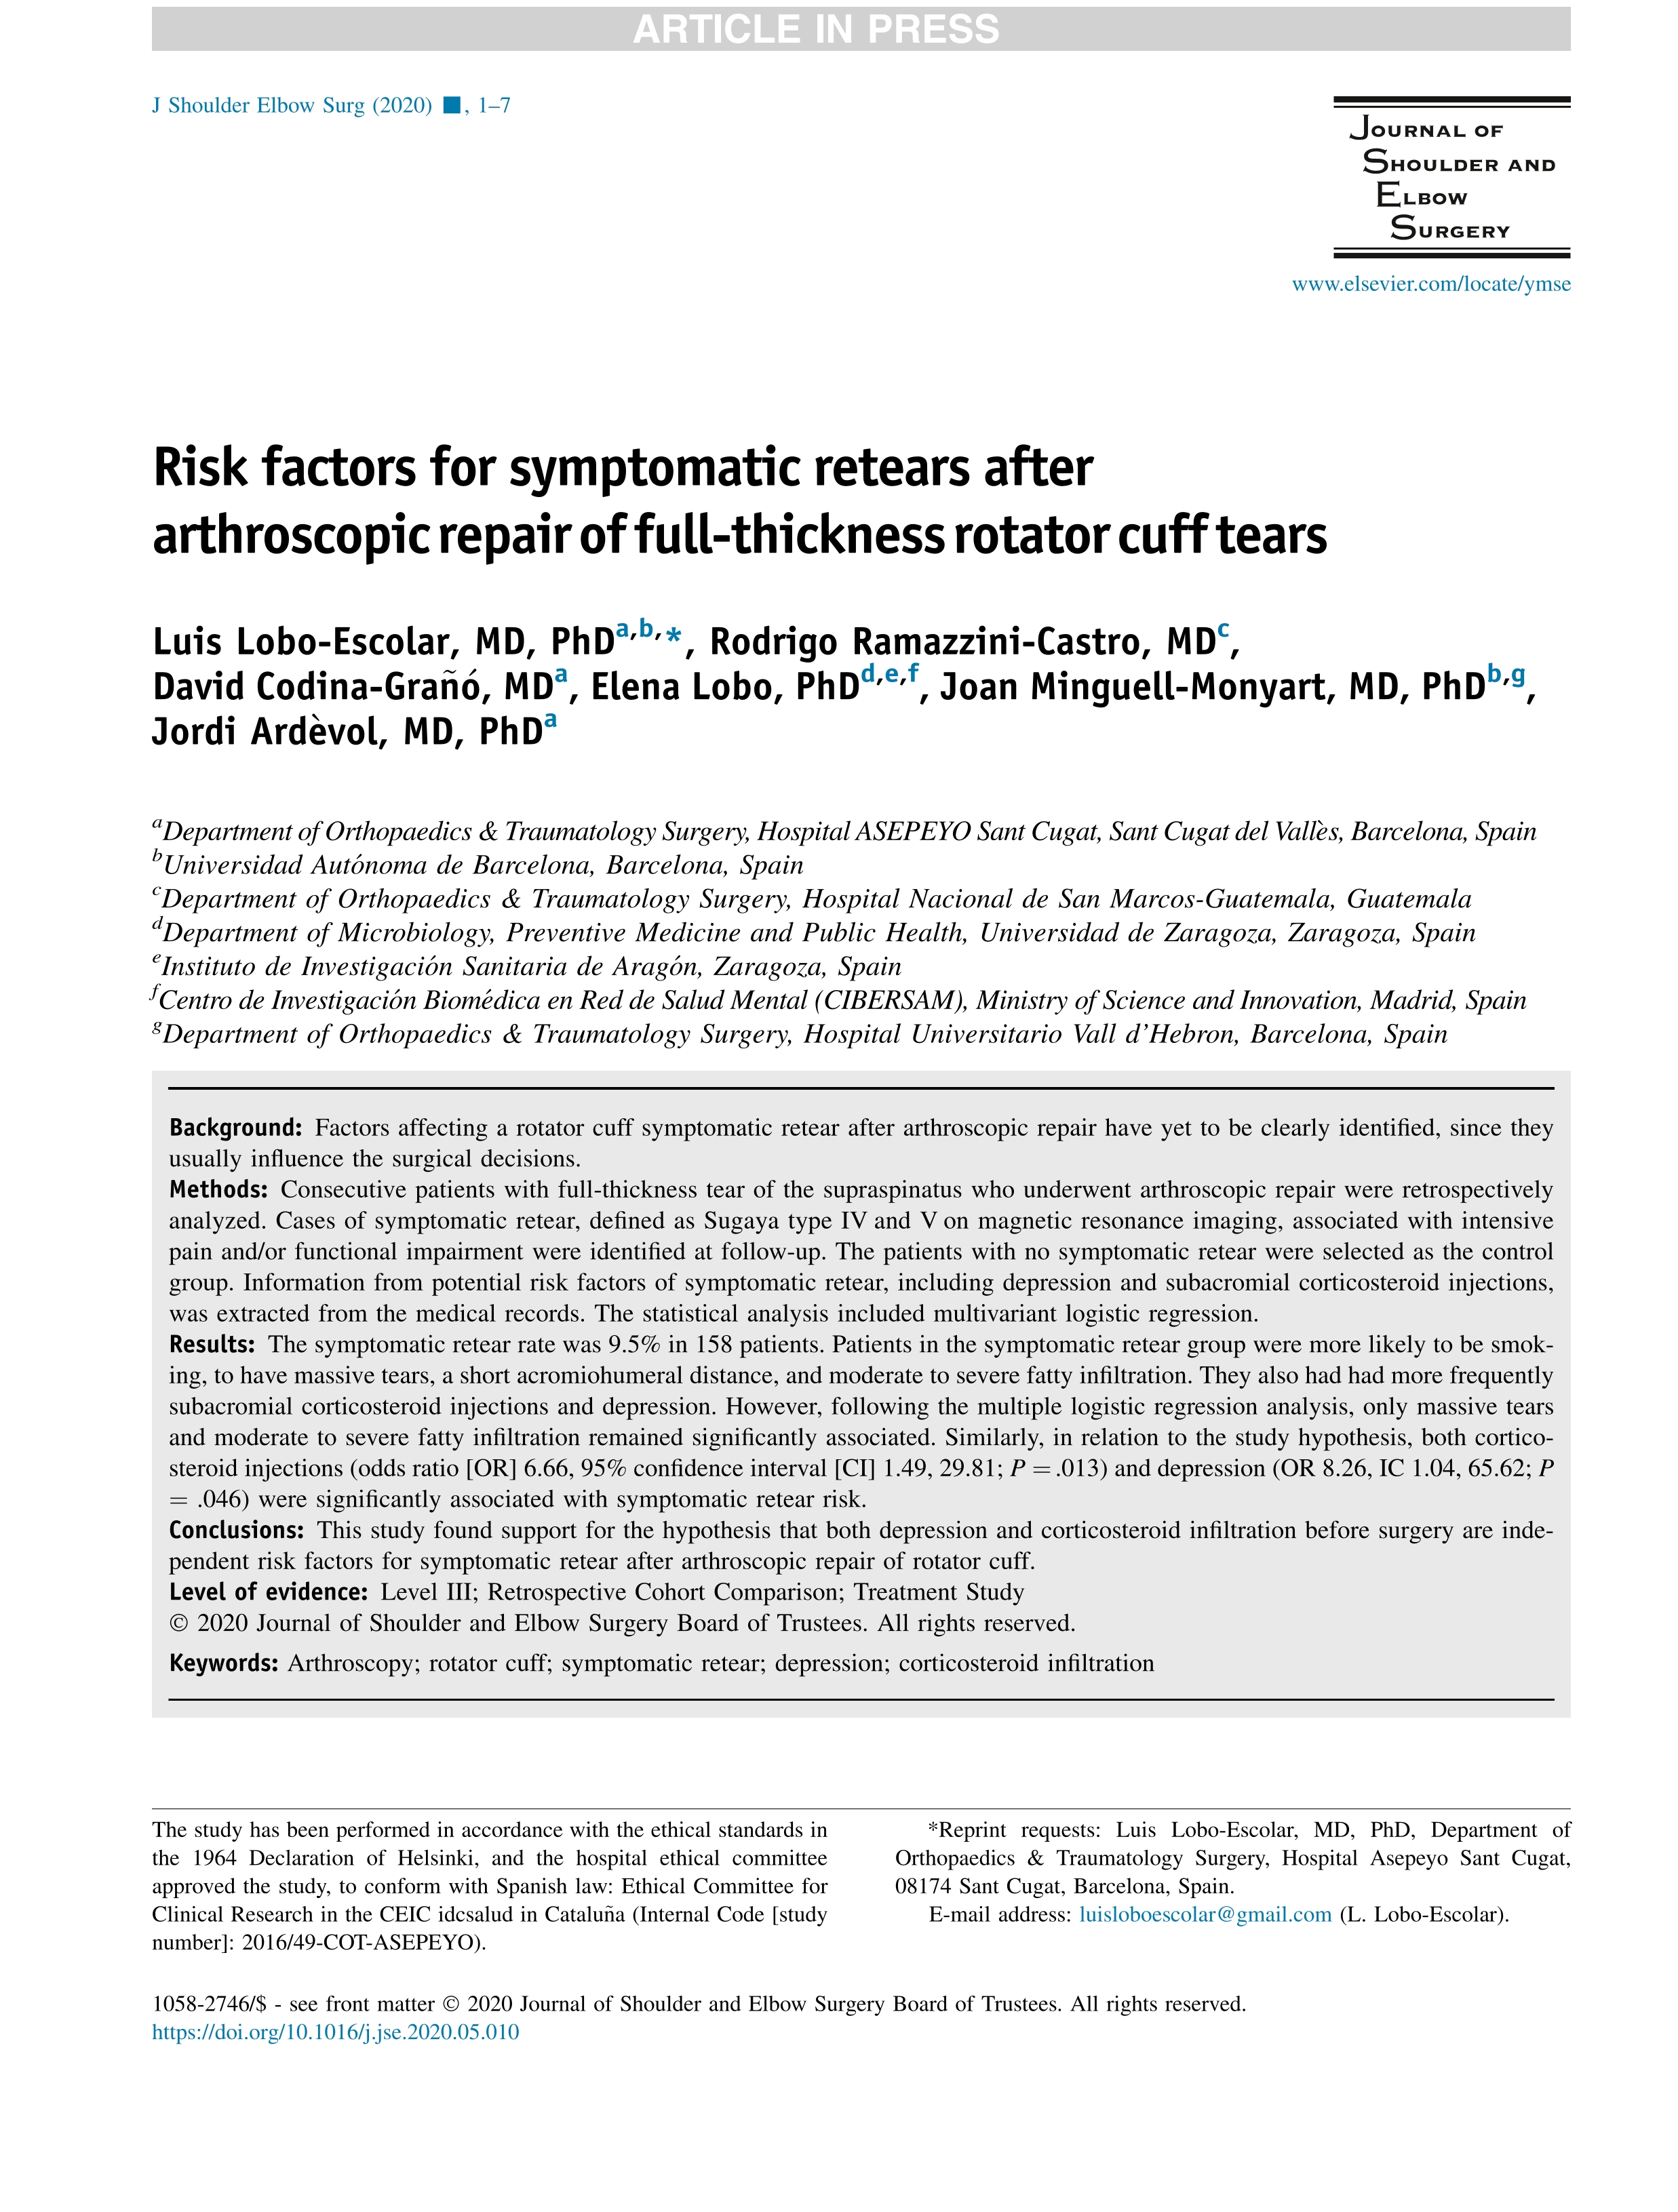 Risk factors for symptomatic retears after arthroscopic repair of full-thickness rotator cuff tears